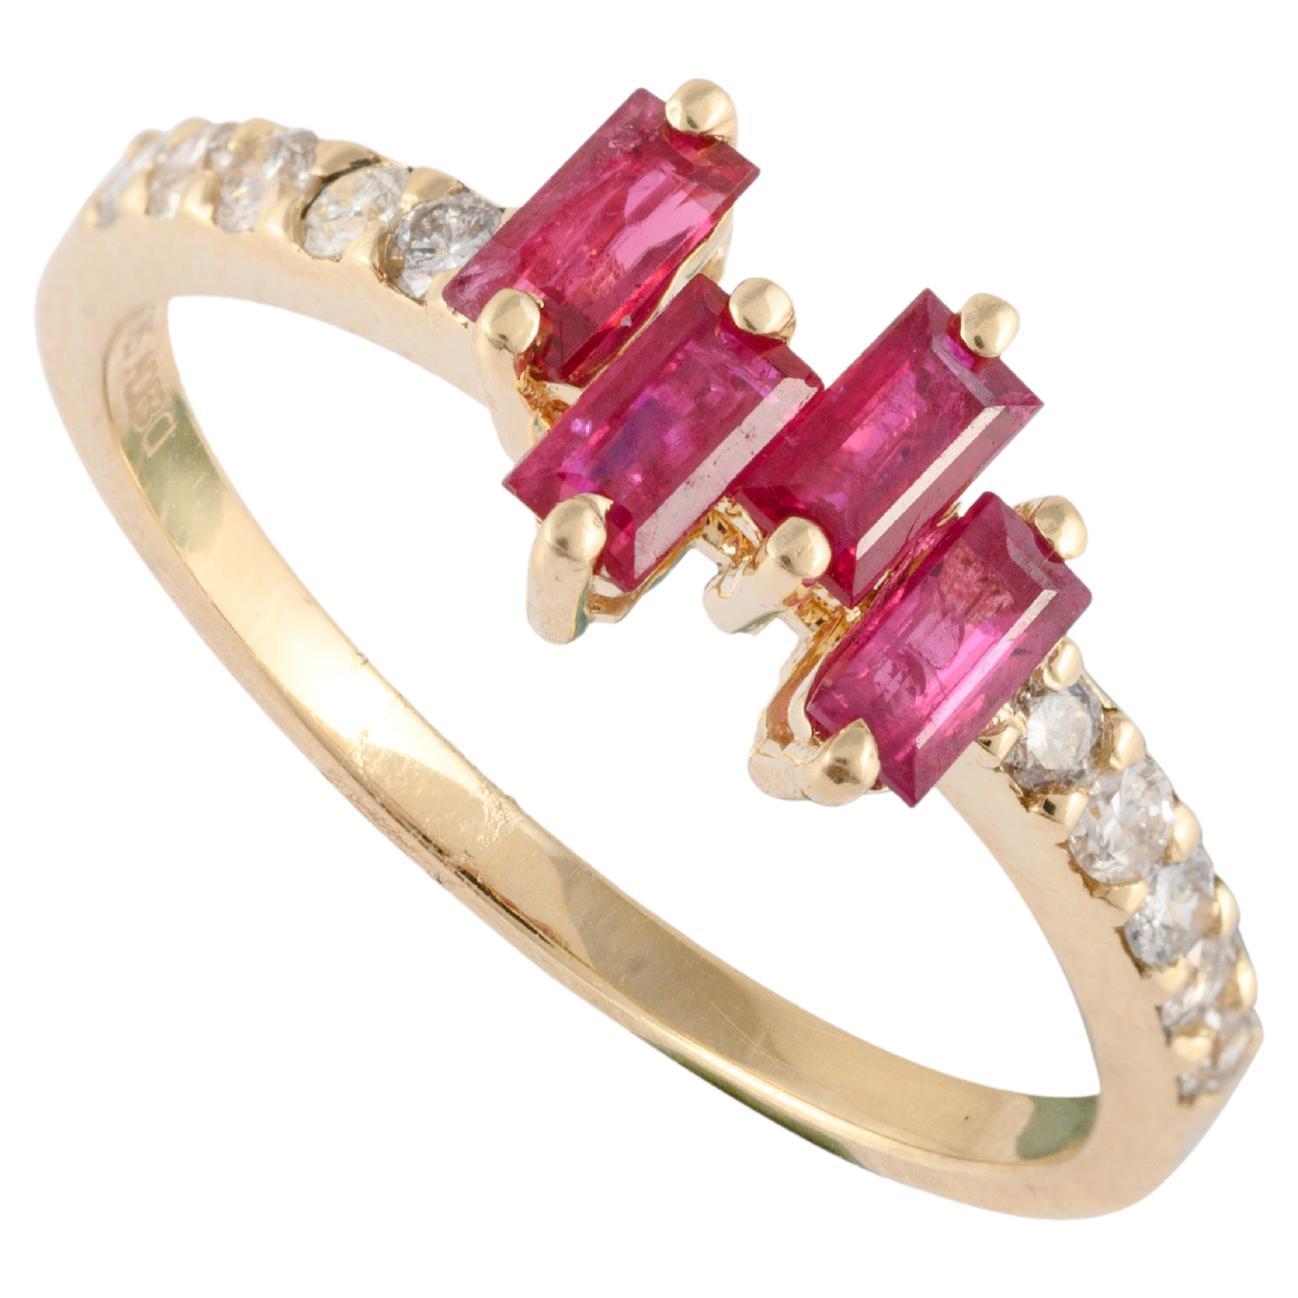 Baguette Ruby Diamond Ring Gift for Her in 14k Solid Yellow Gold